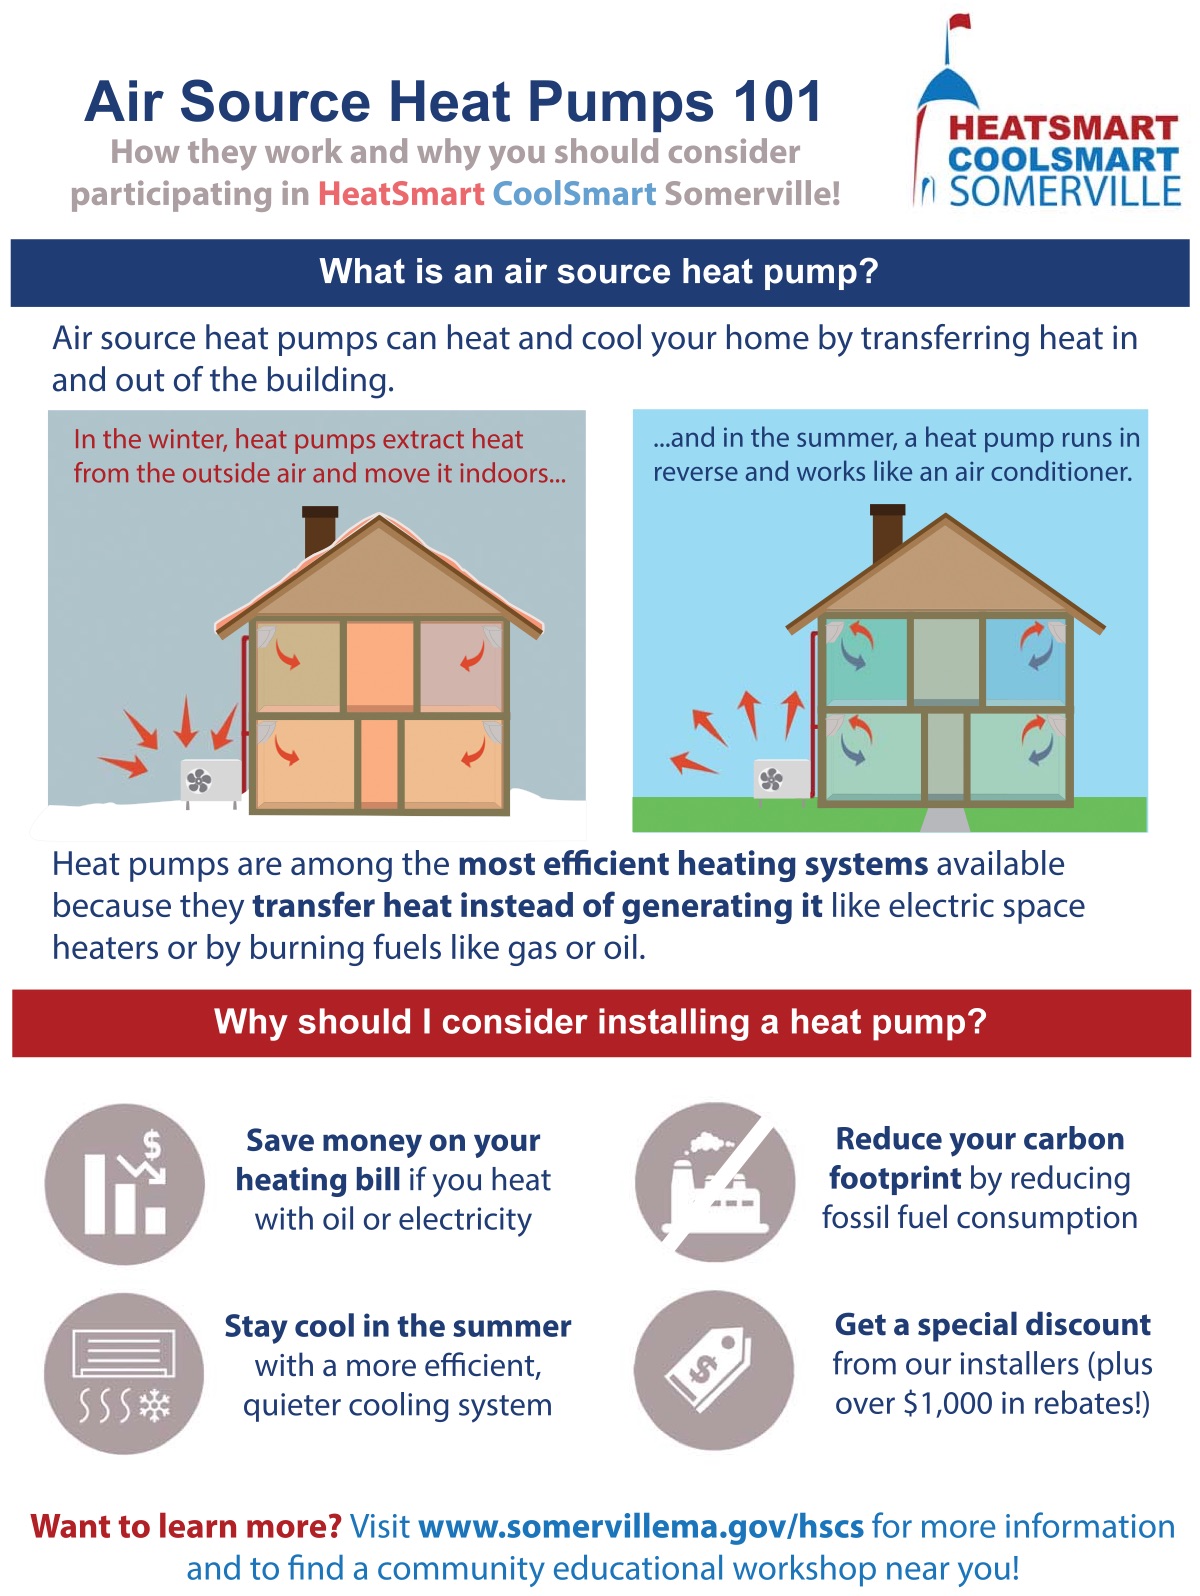 Thumbnail preview of the air source heat pump infographic links to full PDF